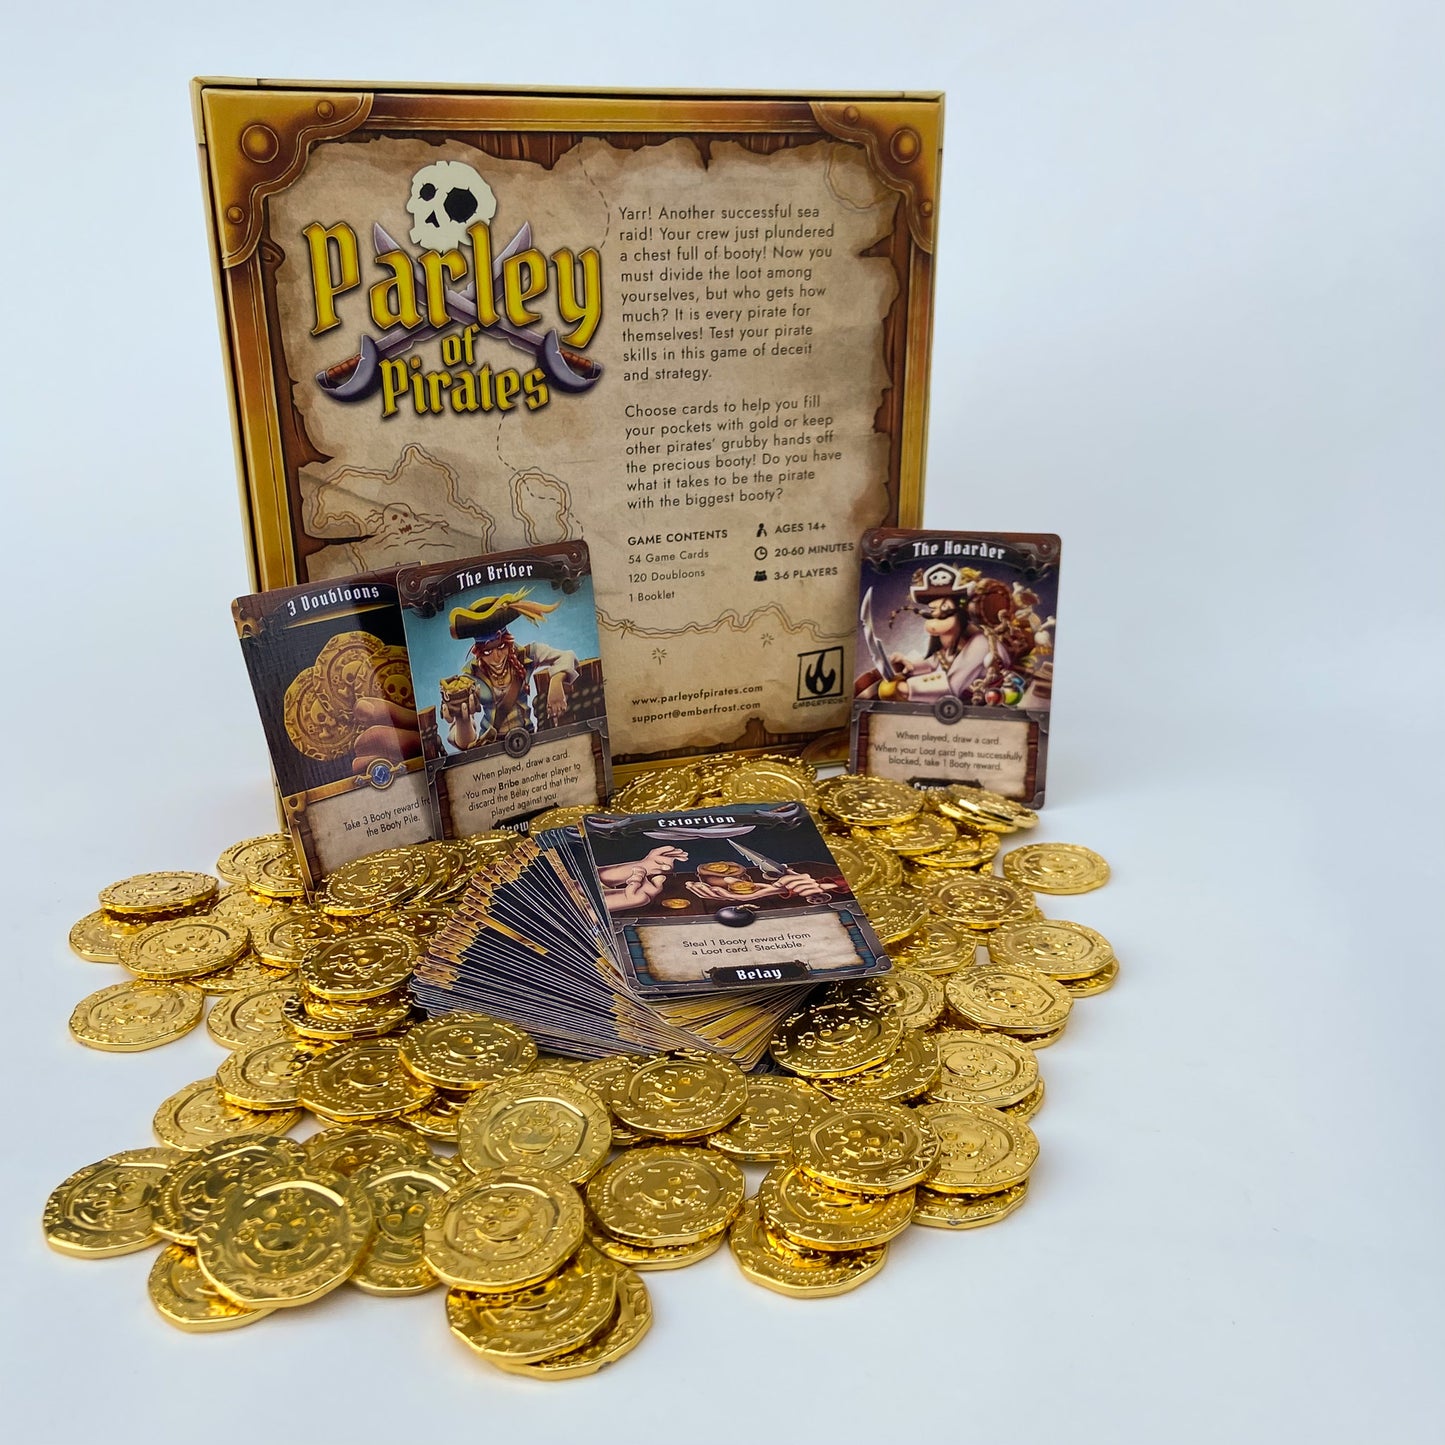 Parley of Pirates Card Game